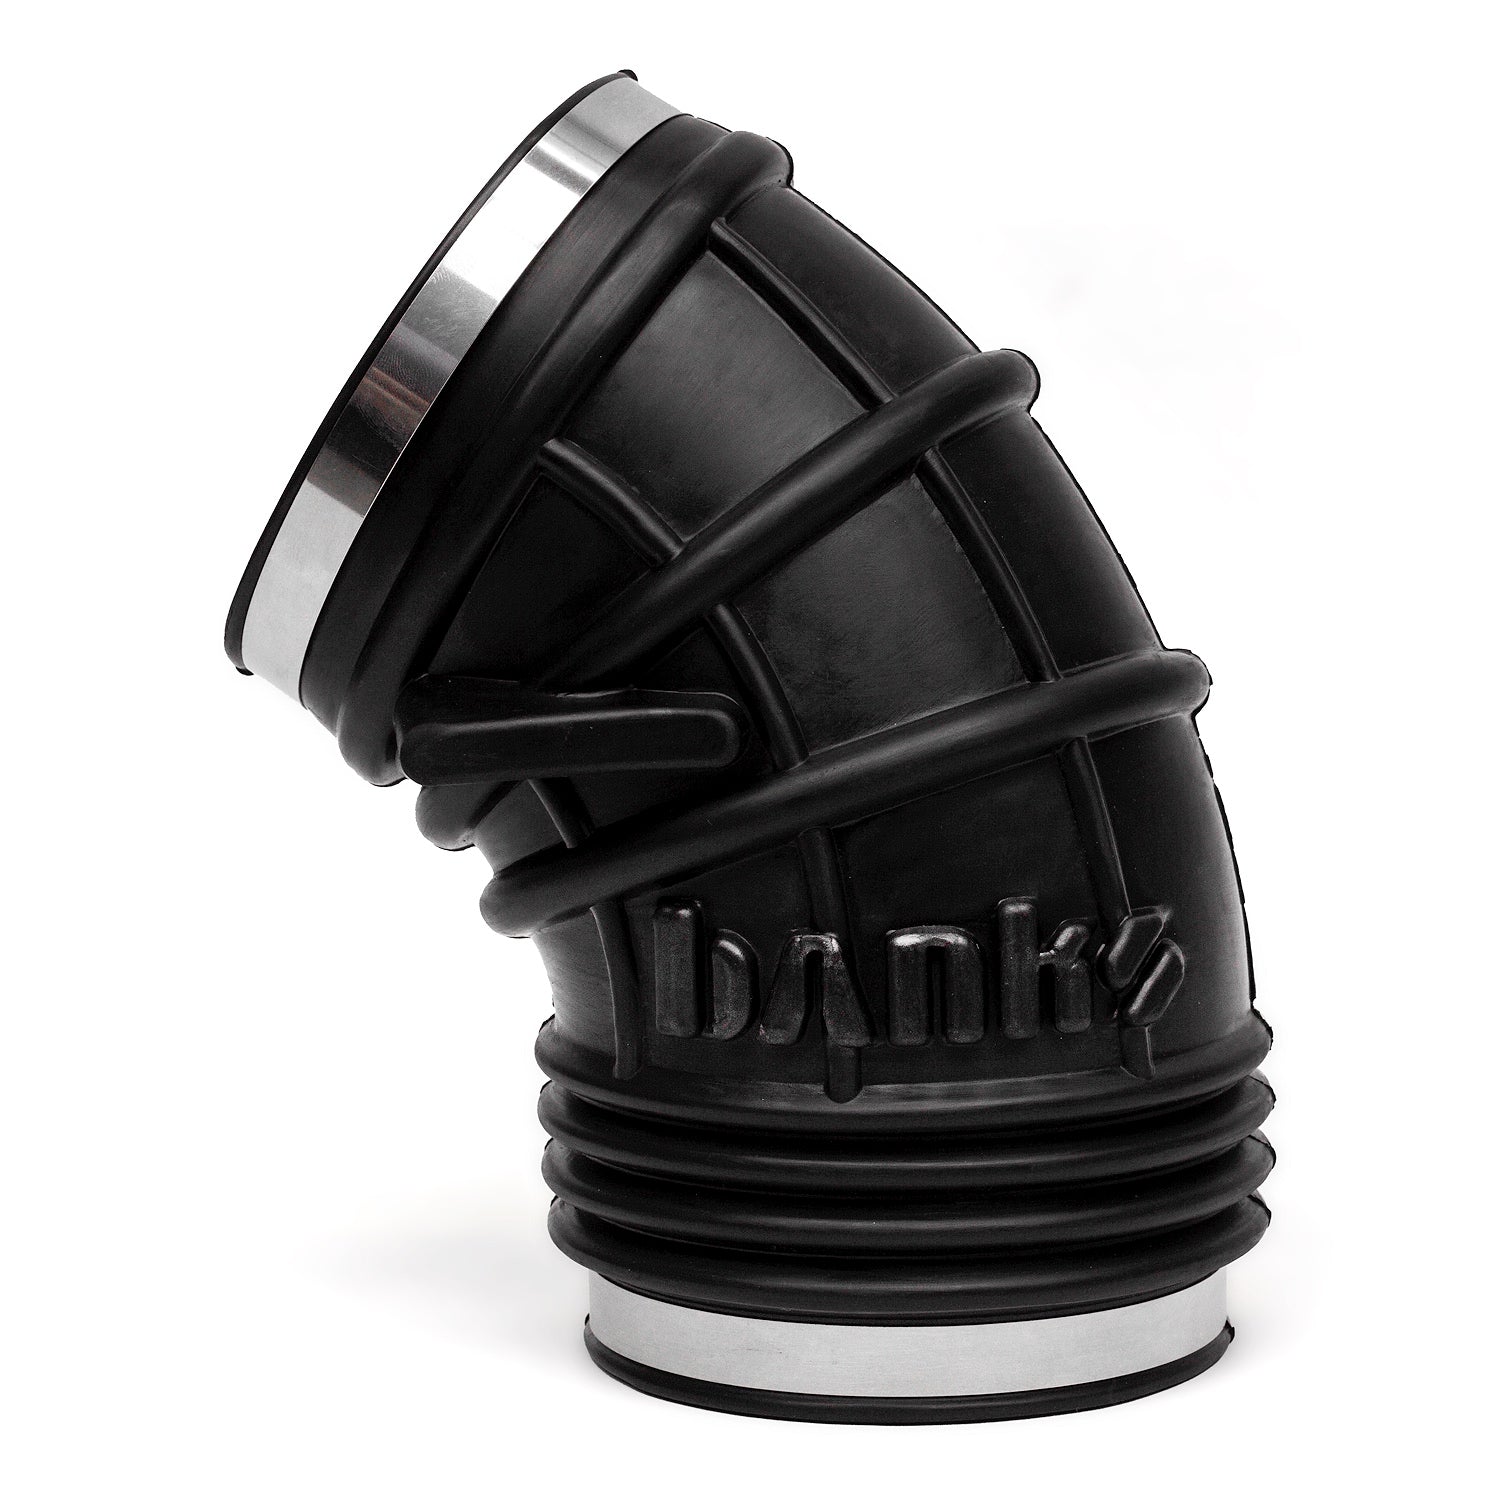 OEM Grade EPDM elbow allows for engine movement and vibration while being incredibly durable.